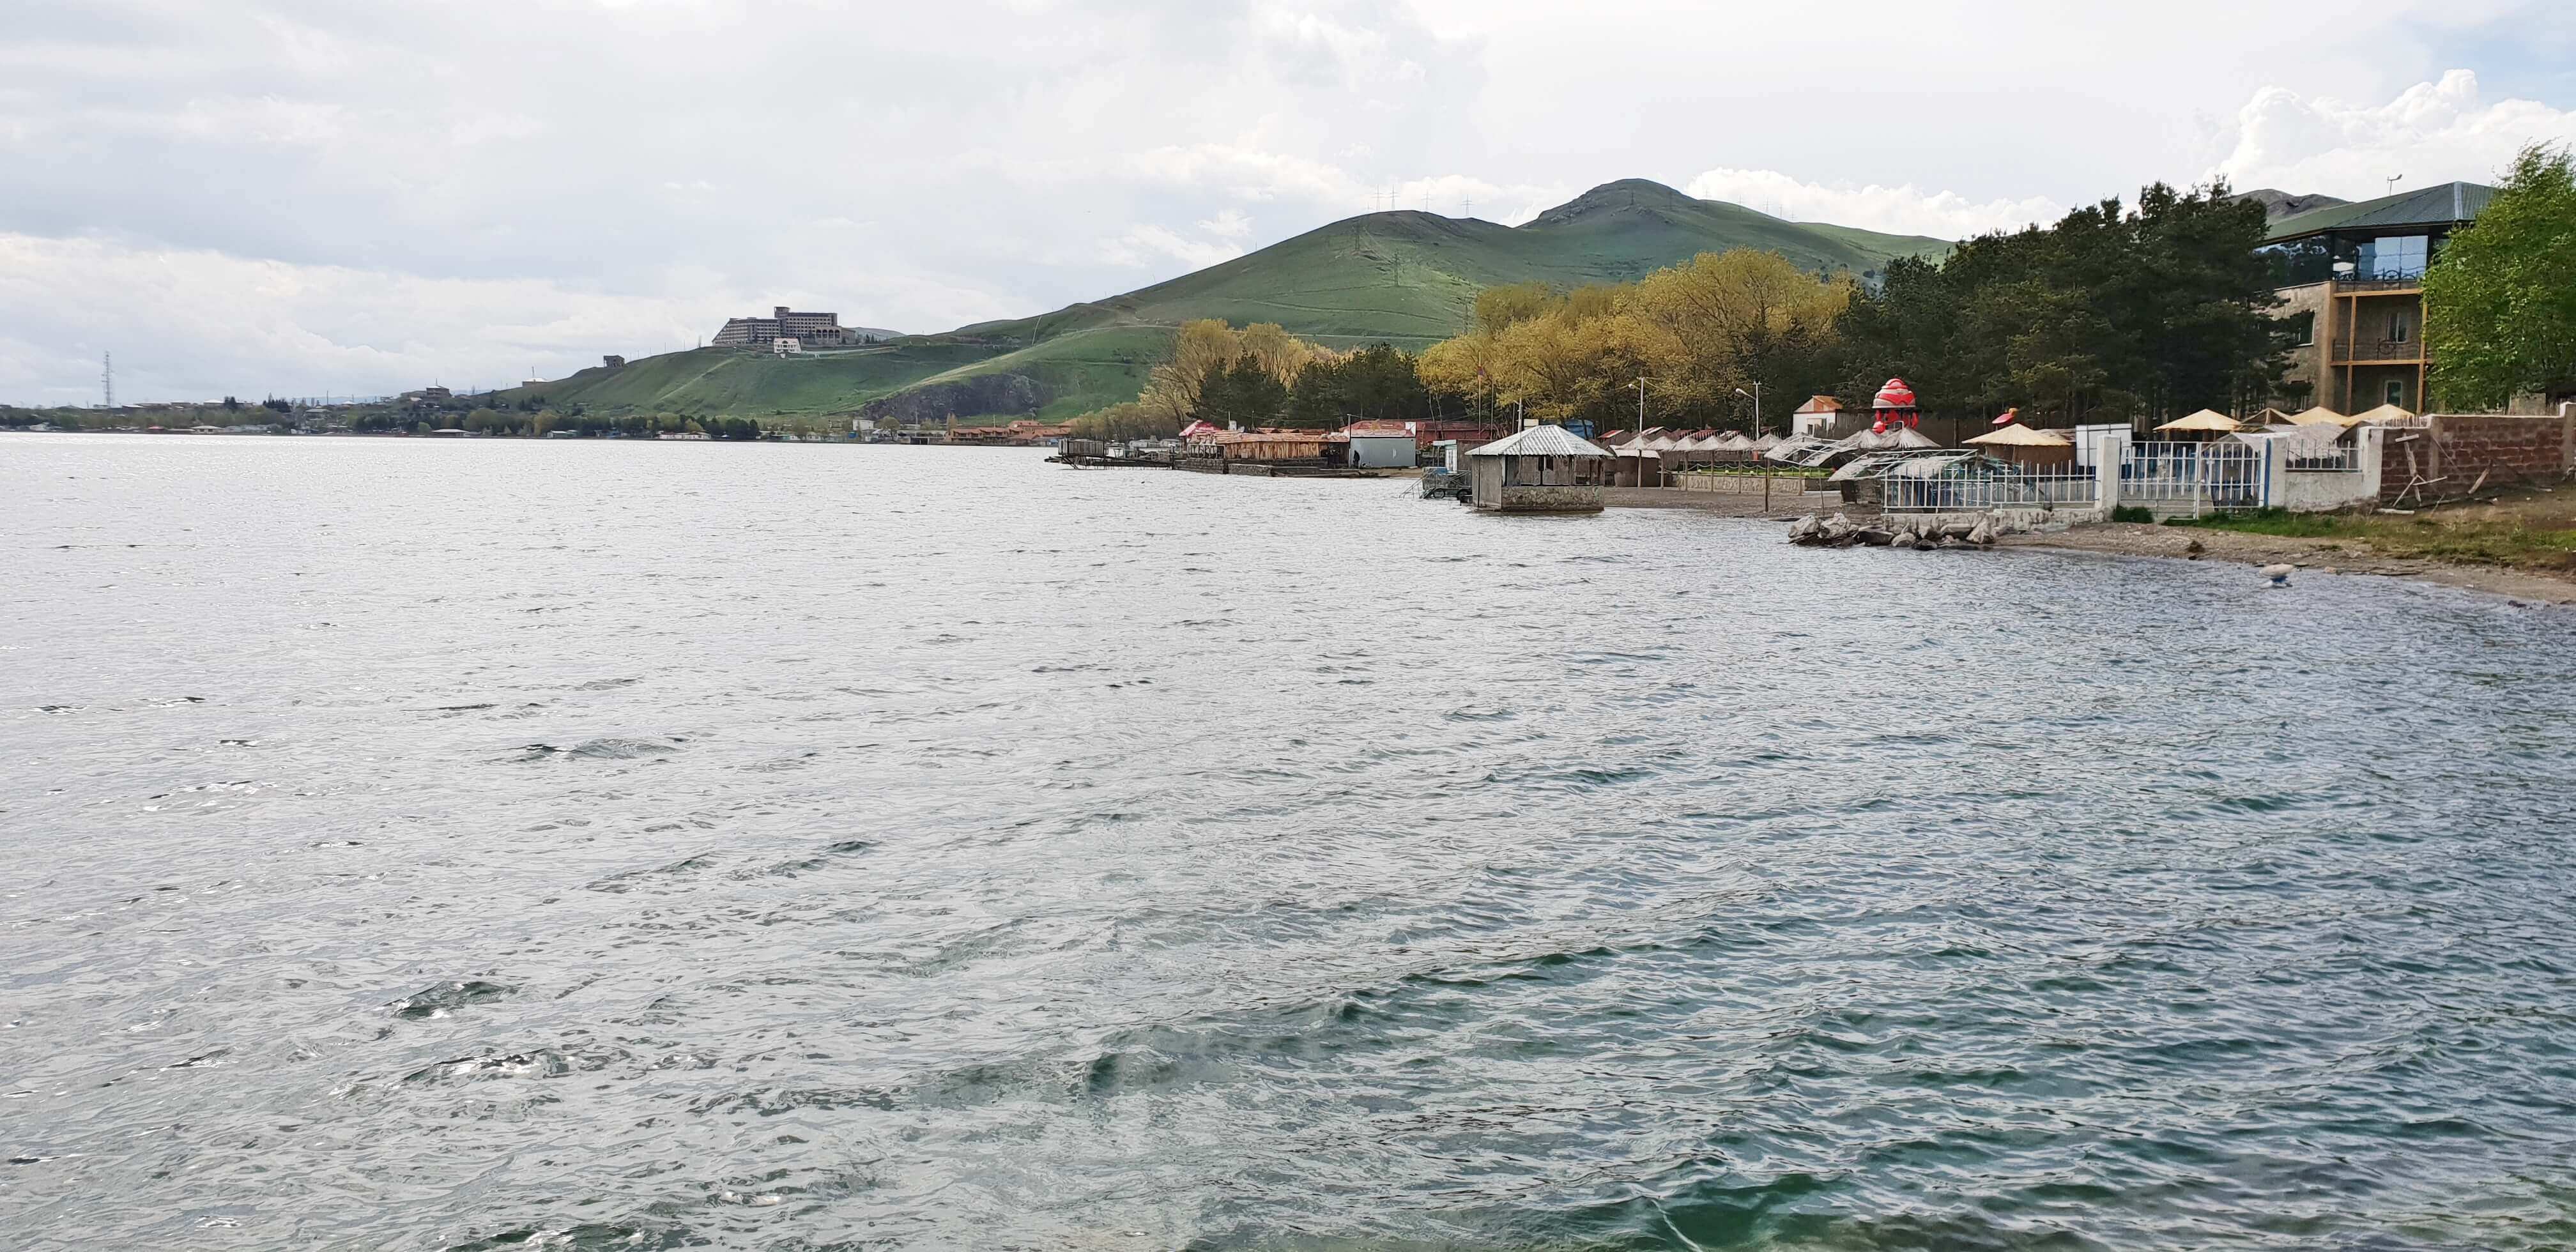 One of the most famous places in Armenia - Sevan Lake